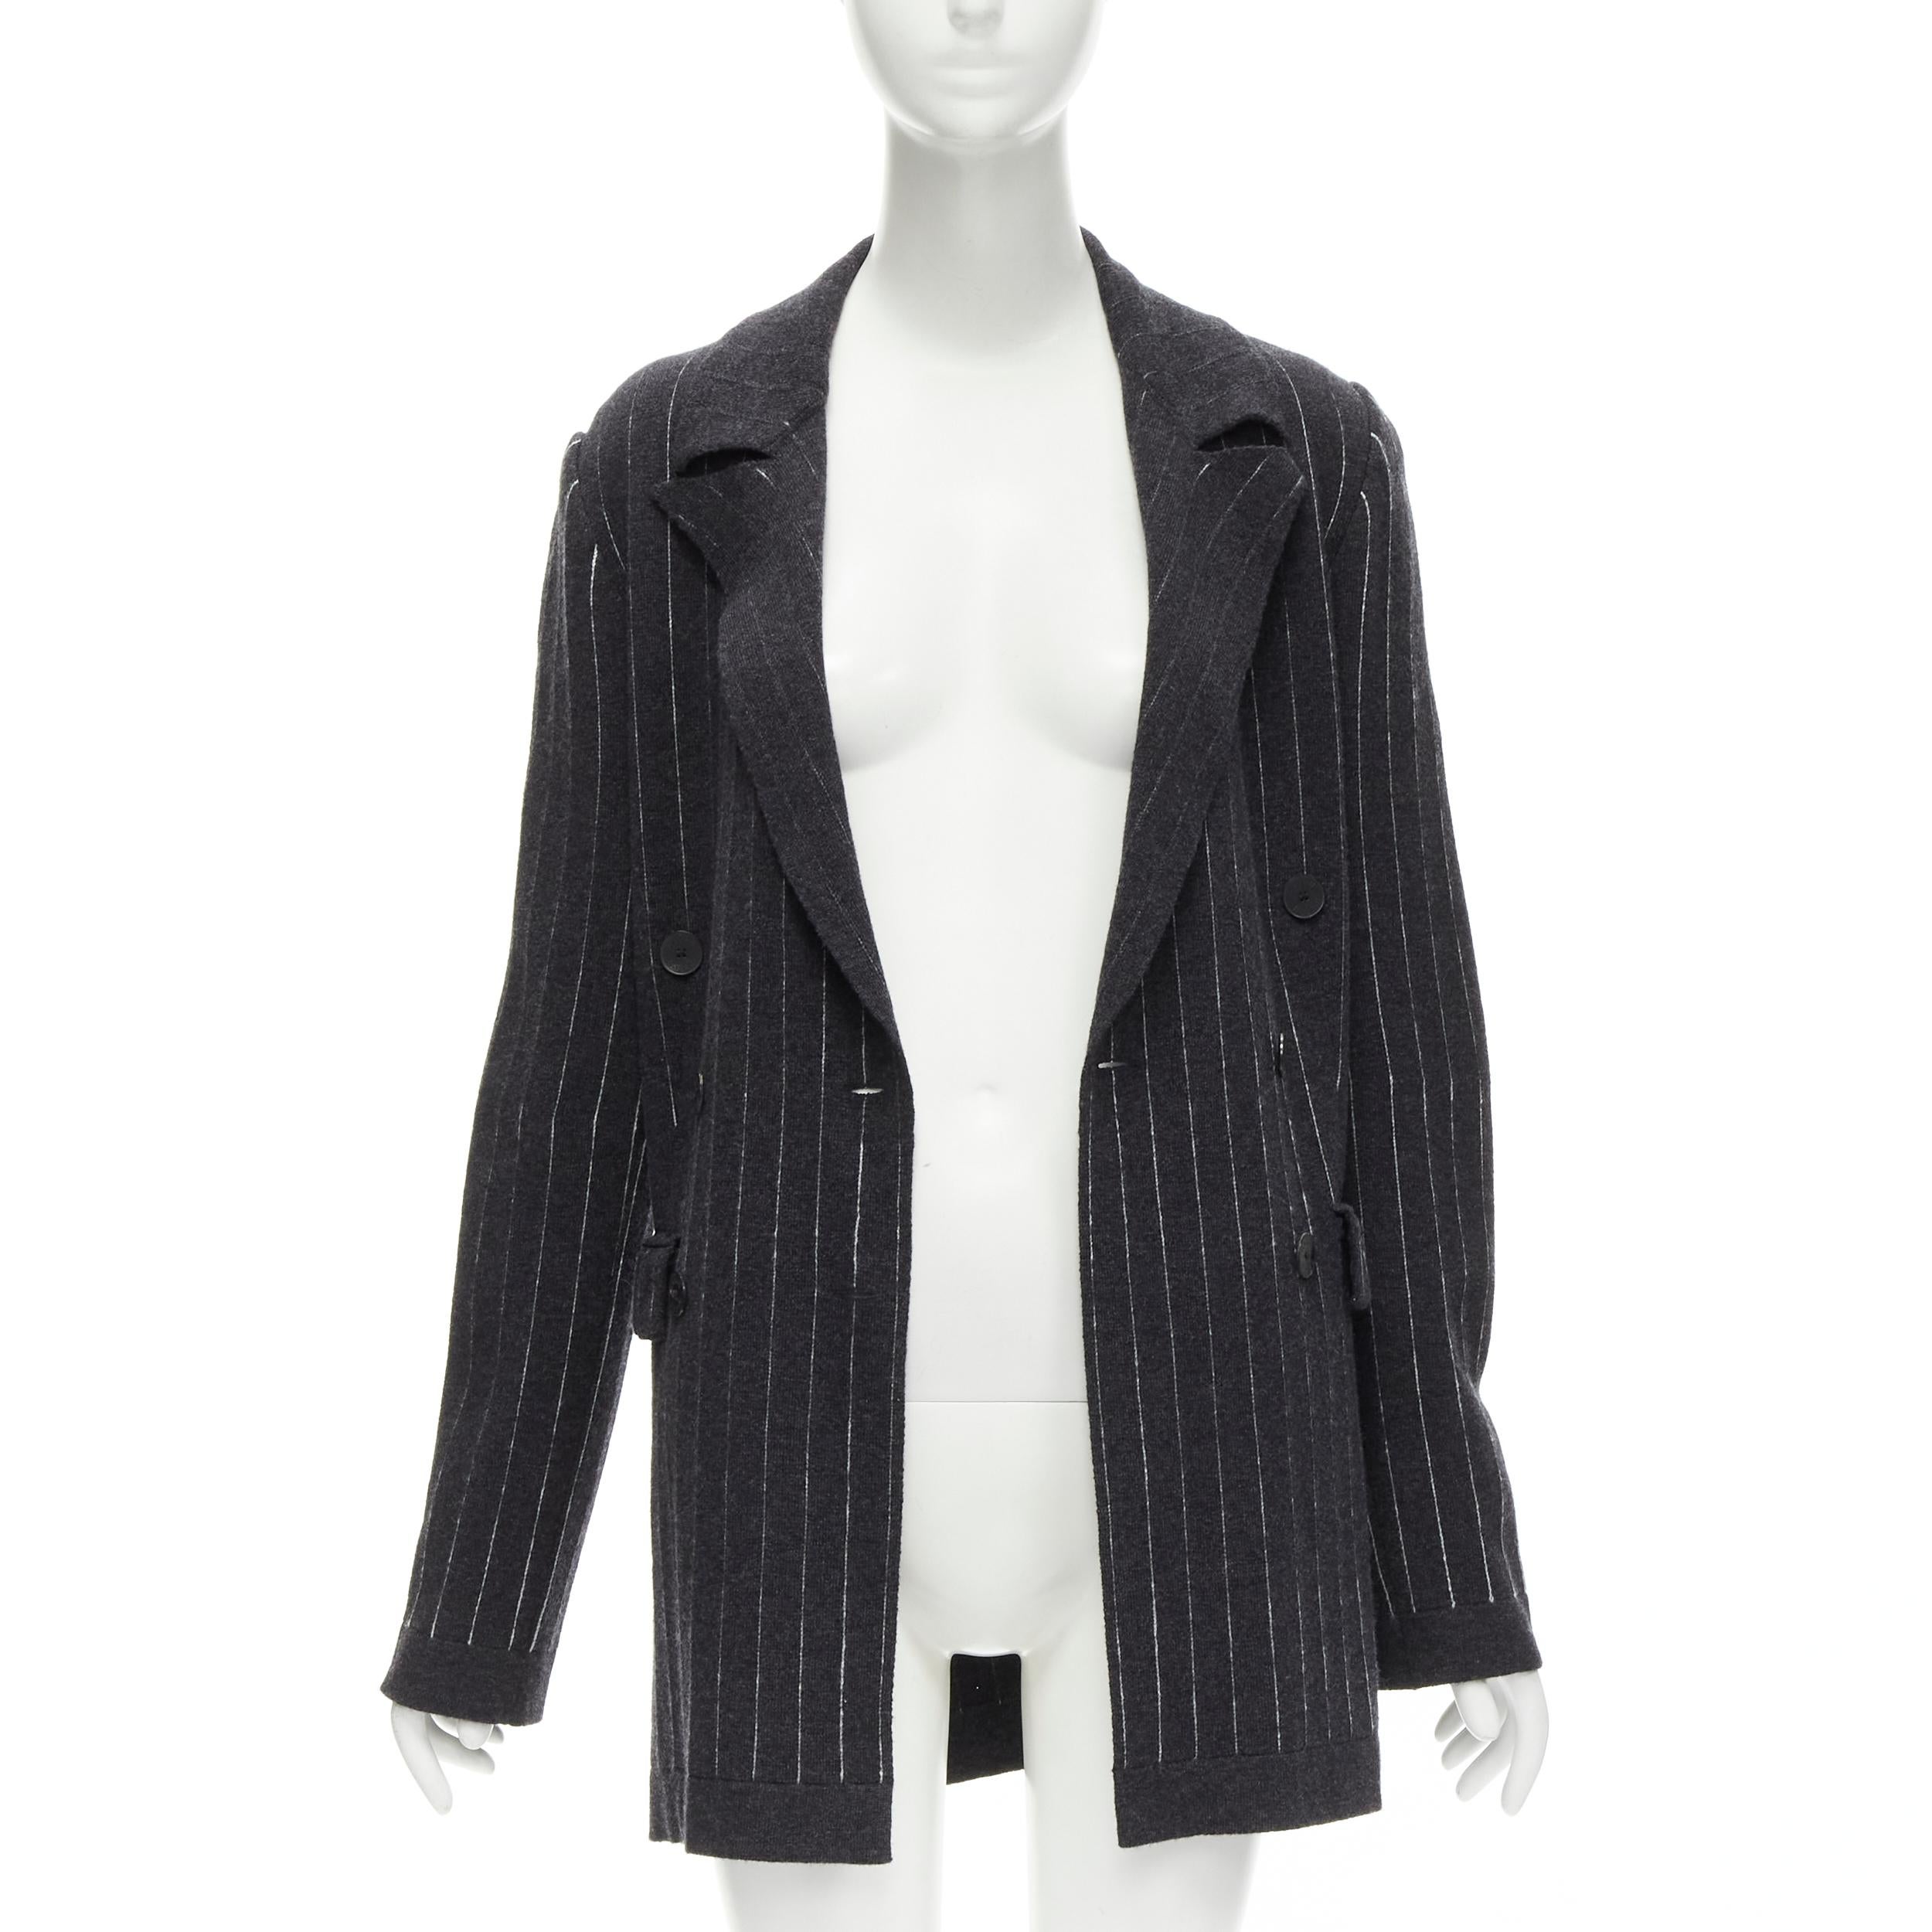 BARRIE 100% pure cashmere dark grey pinstriped double breasted blazer cardigan S
Brand: Barrie
Material: 100% Cashmere
Color: Grey
Pattern: Pinstriped
Closure: Button
Extra Detail: Spread collar. Double breasted front. Dual flap front pockets.